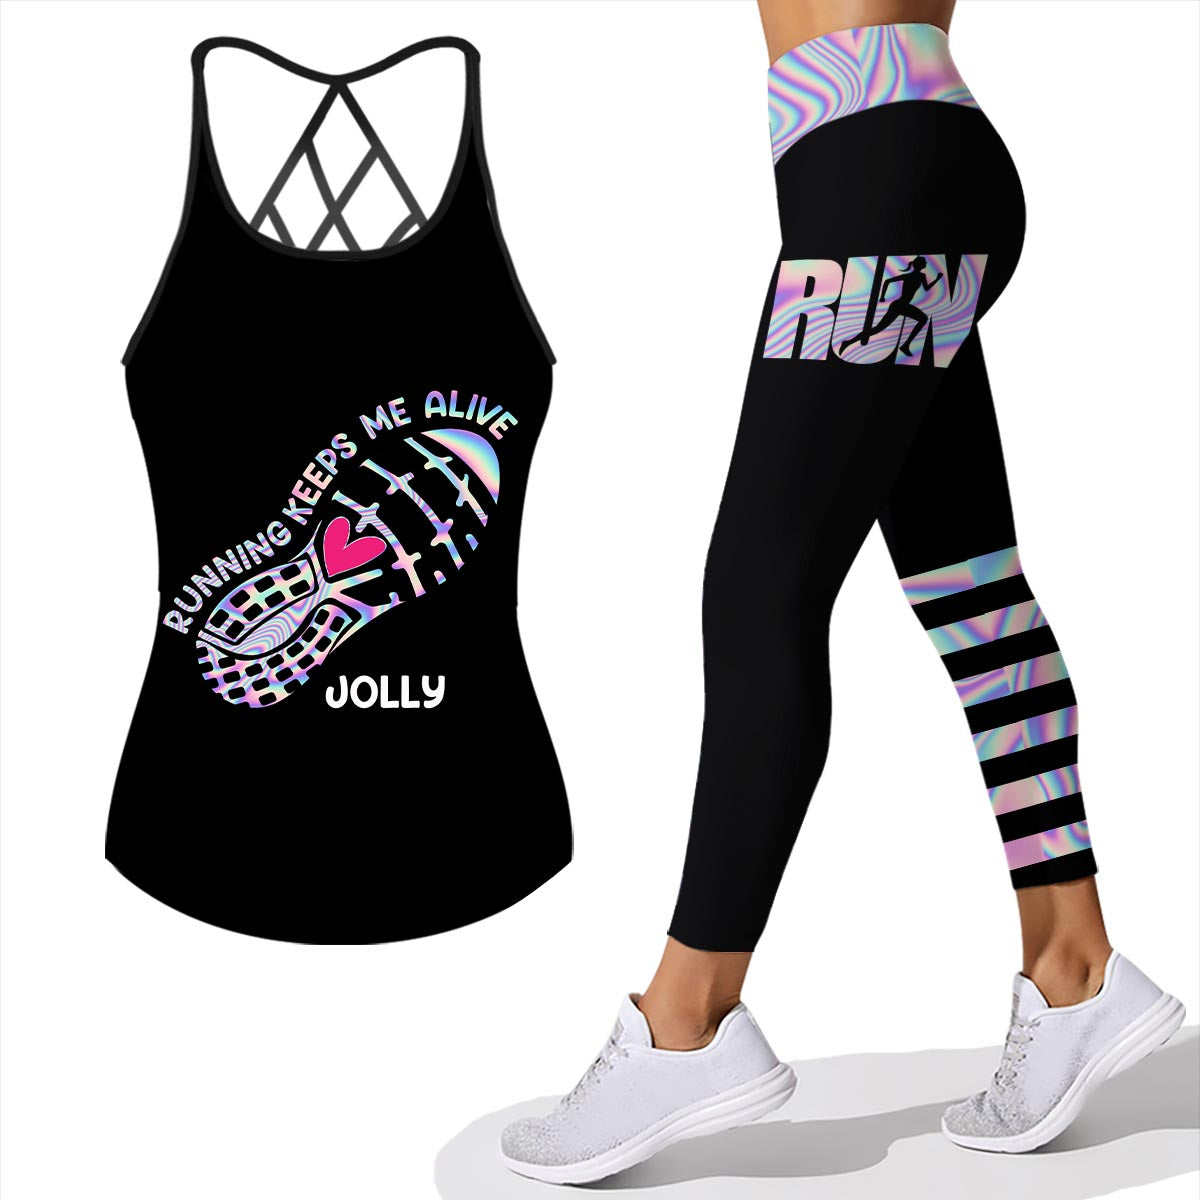 Running Keeps Me Alive - Personalized Running Cross Tank Top and Leggings